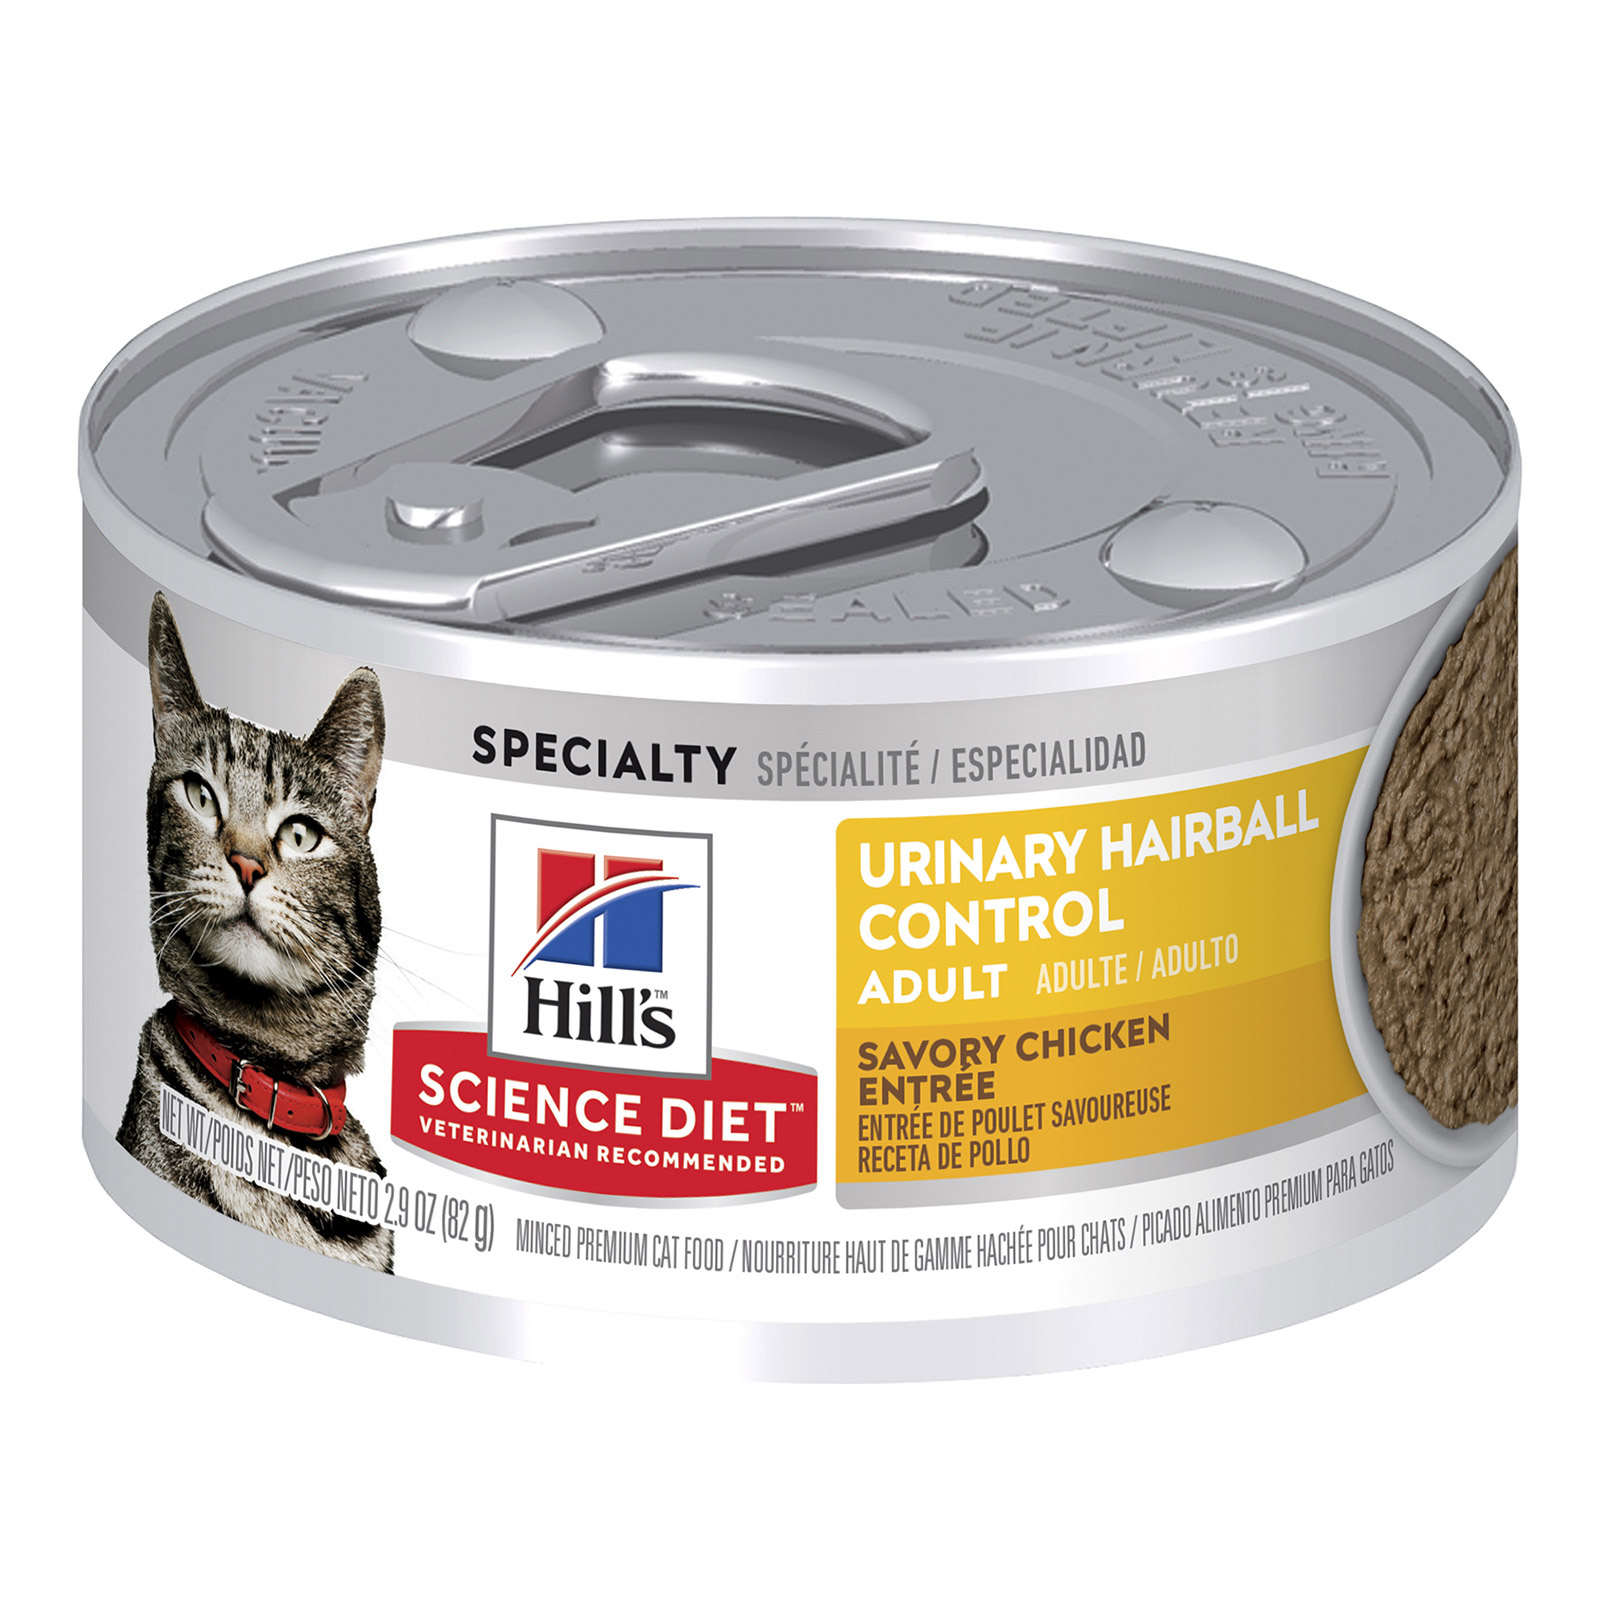 Hill's Science Diet Adult Urinary Hairball Control Canned Cat Food for Food